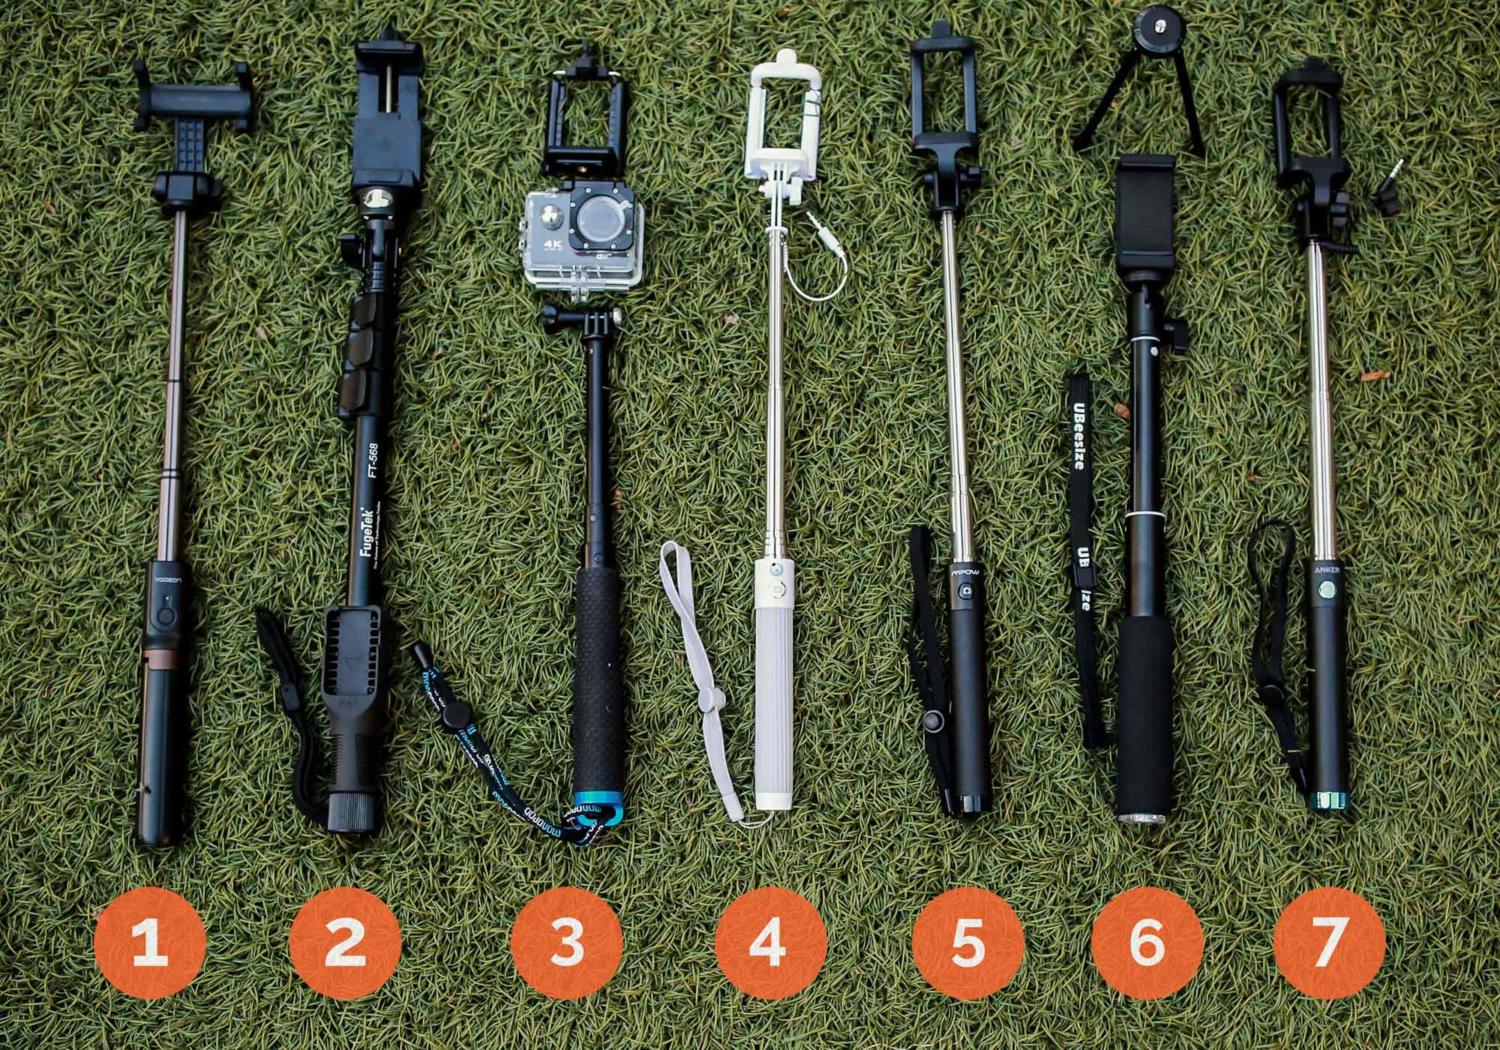 The Best Selfie Sticks Of Reviews By Your Best Digs